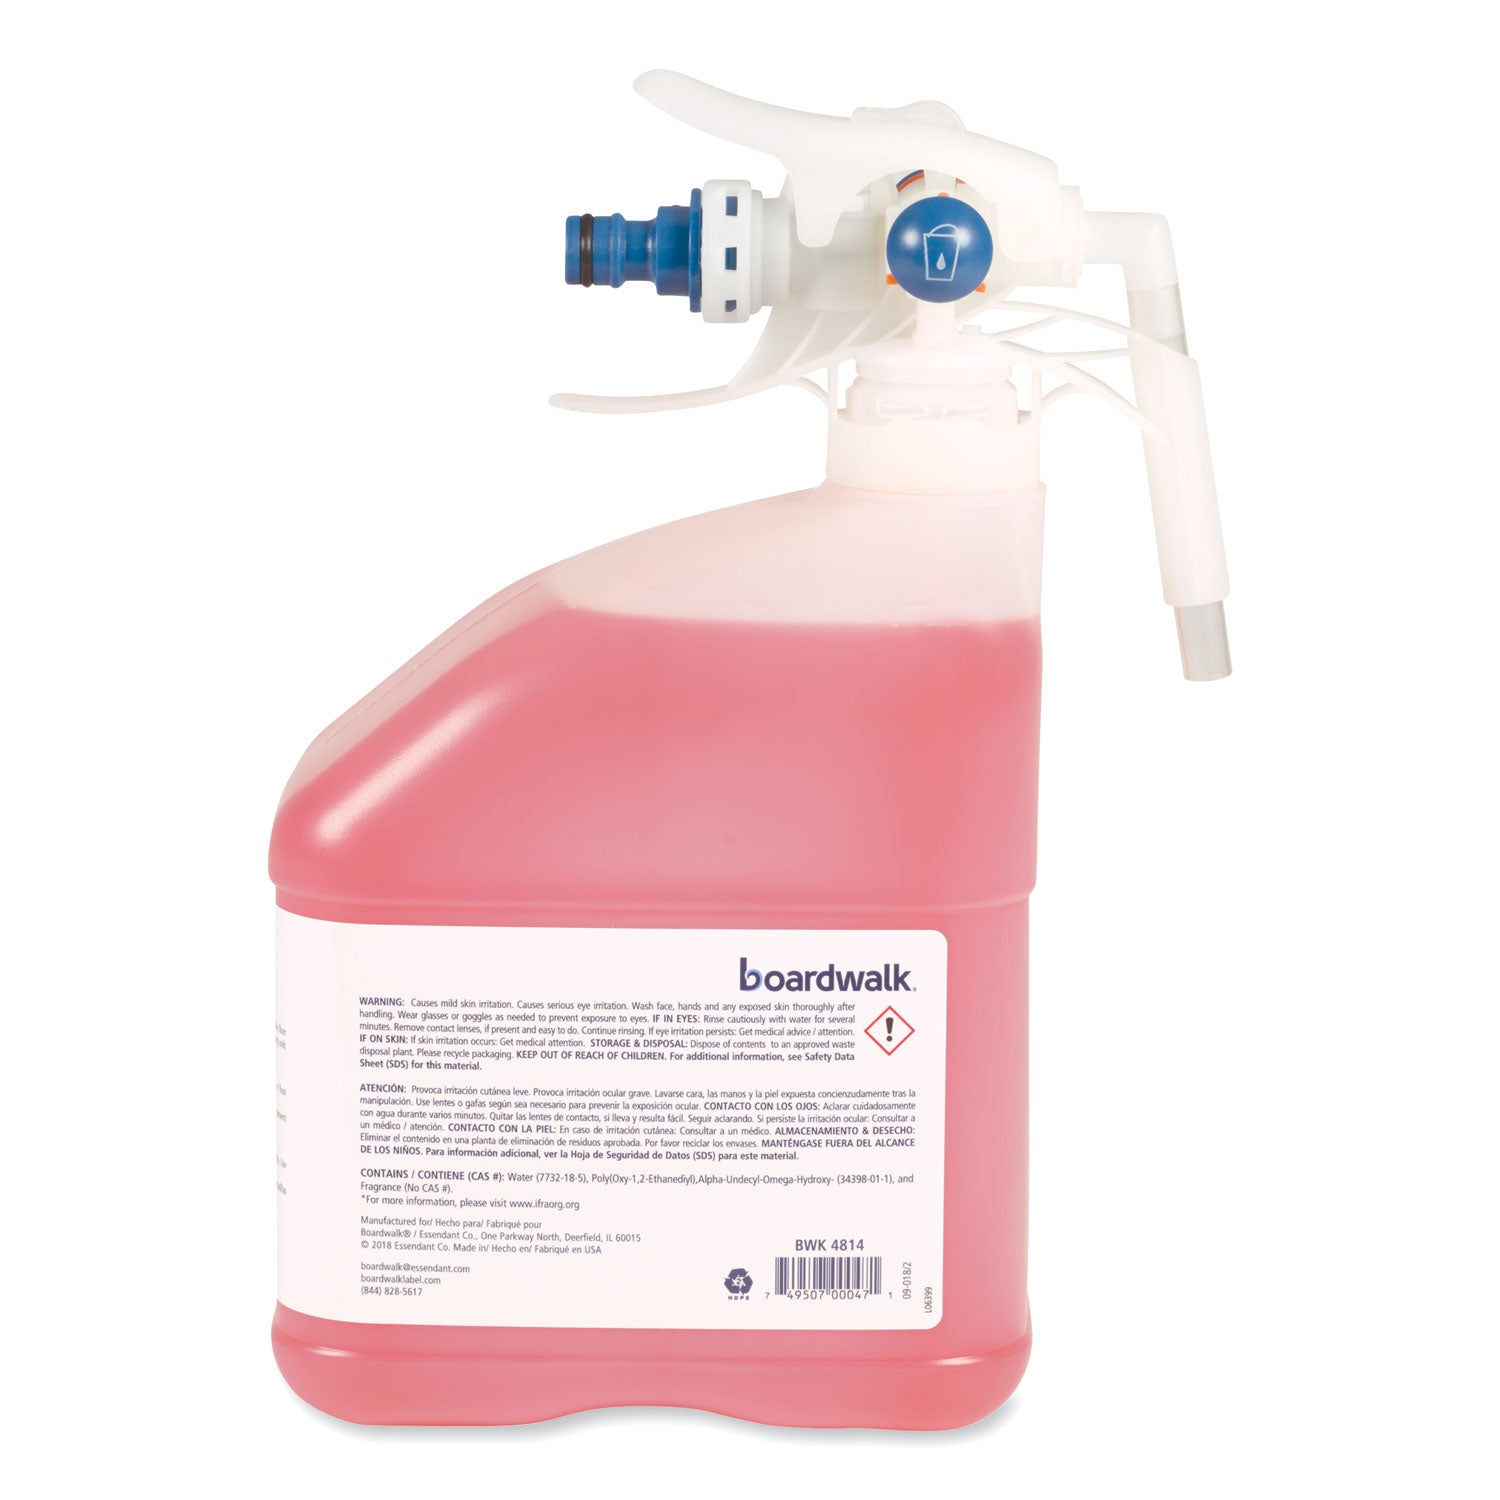 pdc-neutral-floor-cleaner-tangy-fruit-scent-3-liter-bottle-2-carton_bwk4814 - 4